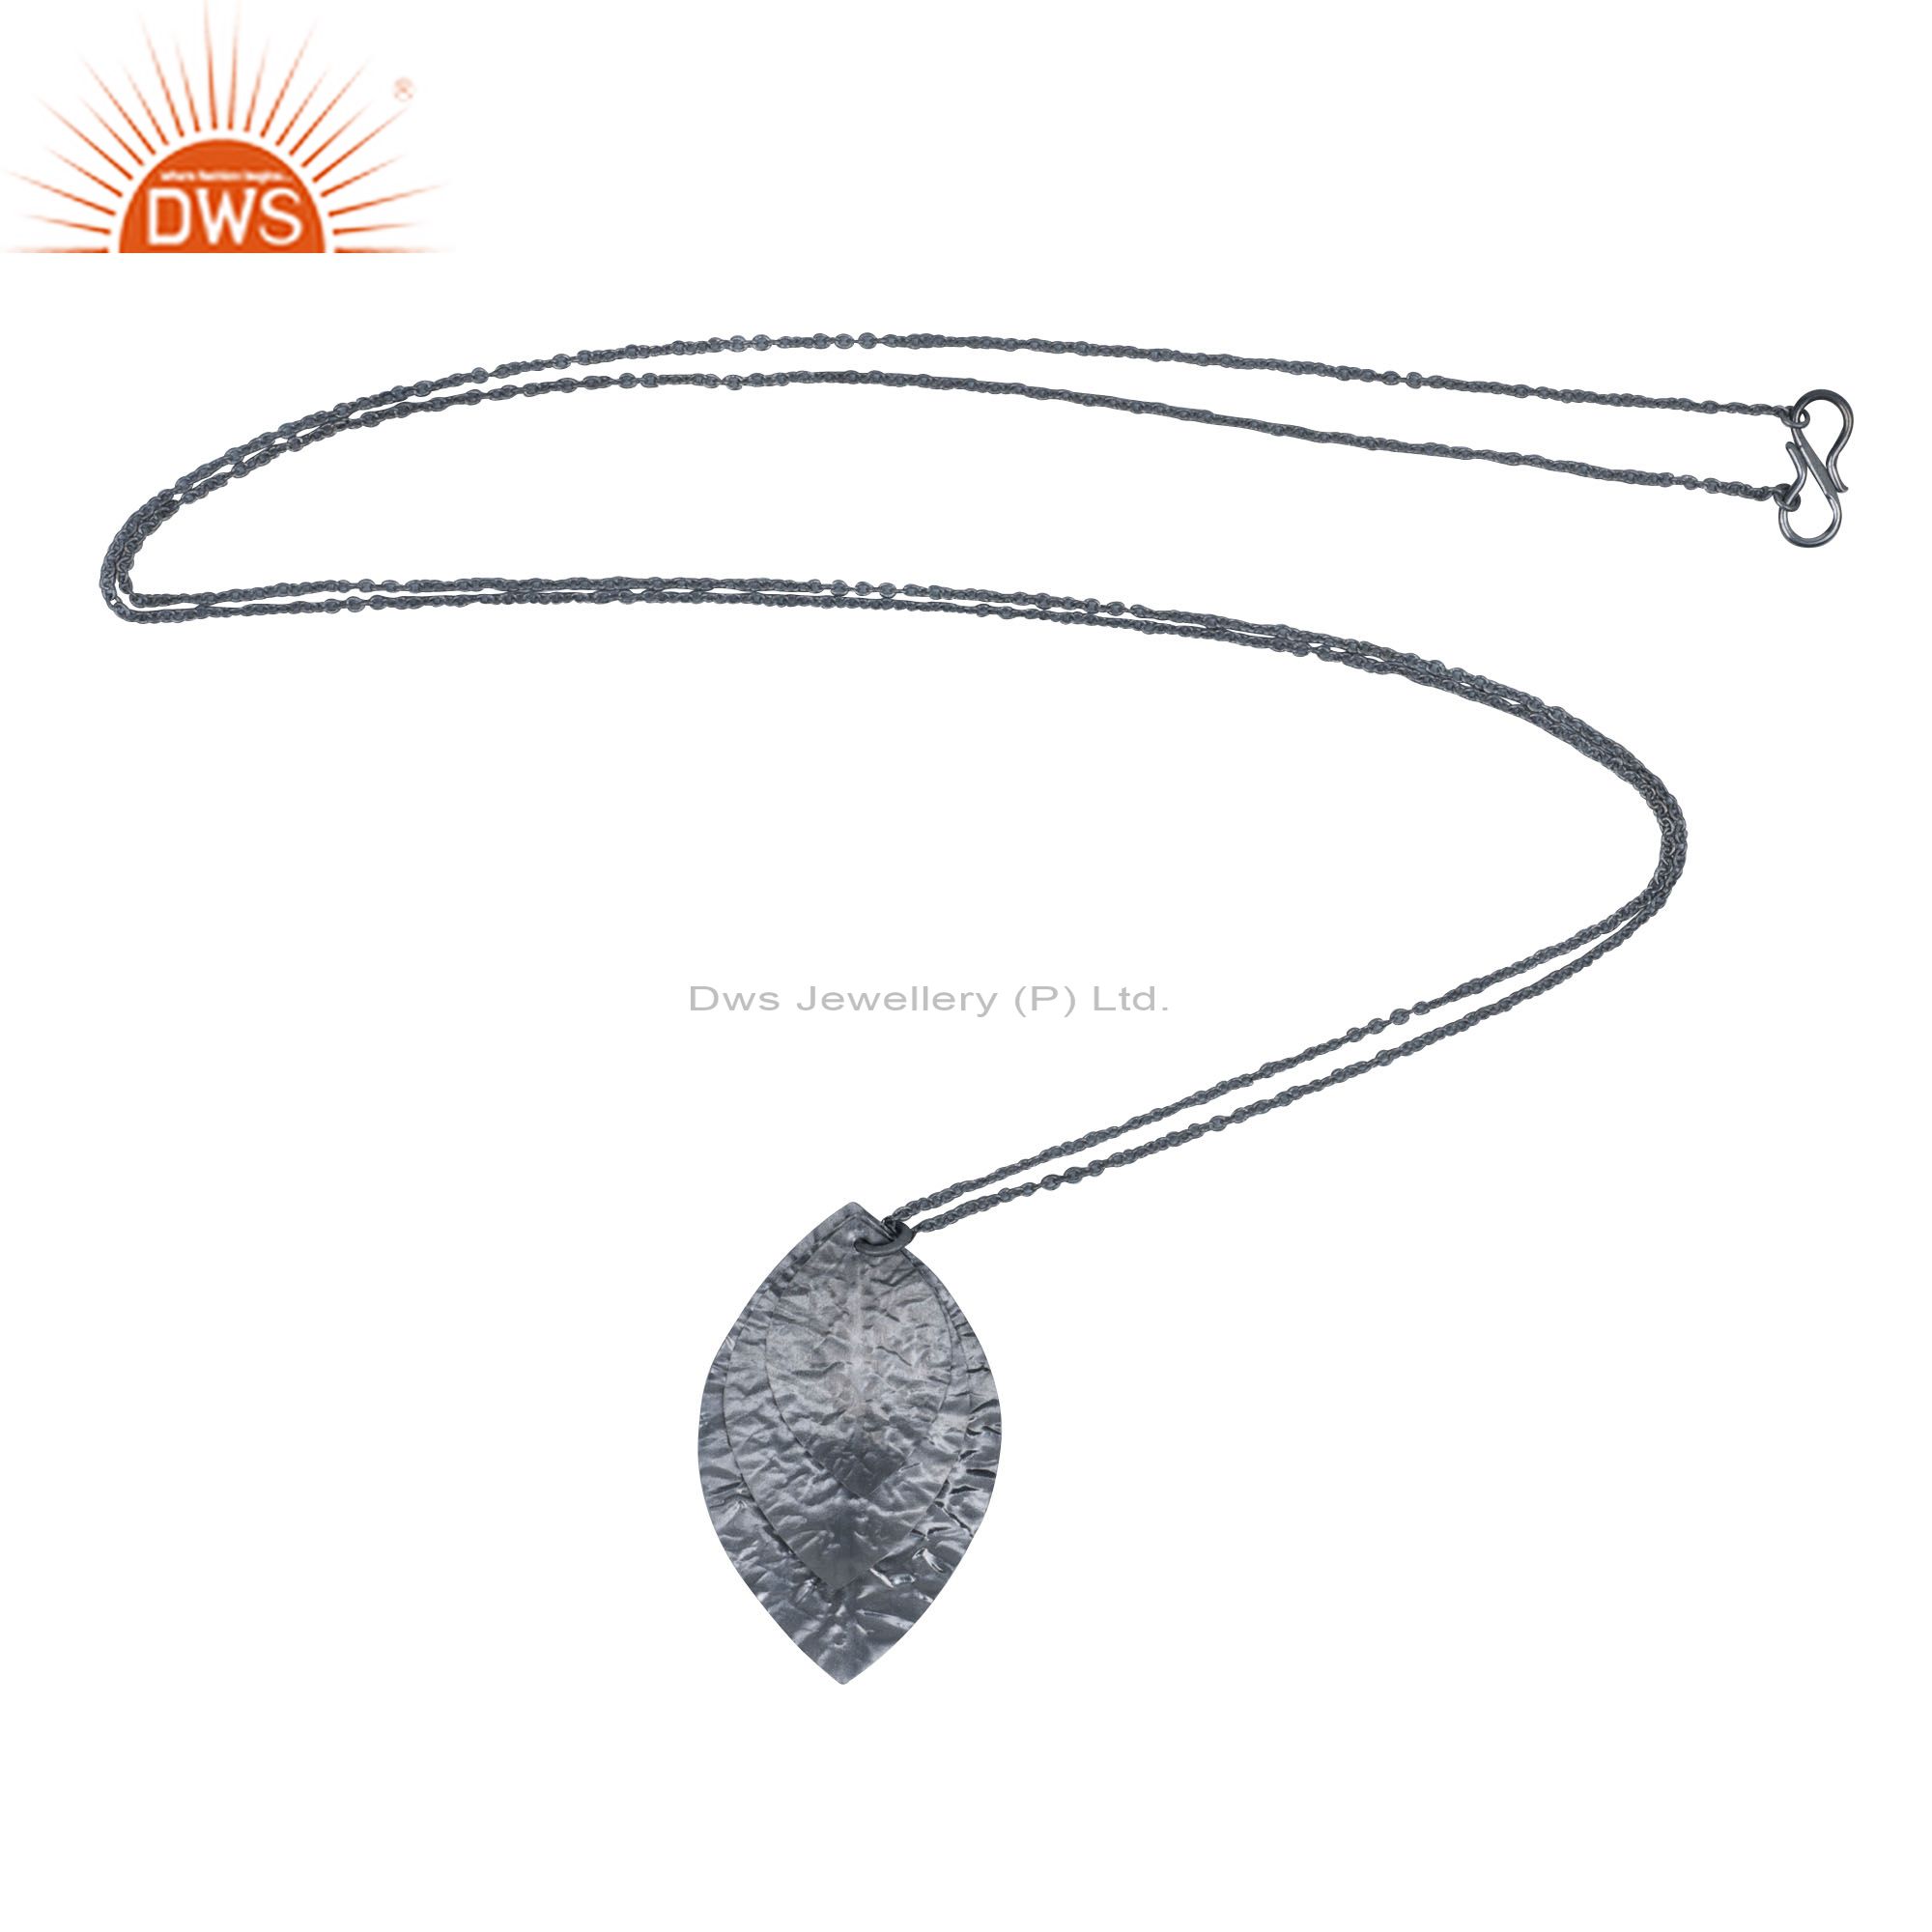 Oxidized solid sterling silver three petal pendant with chain necklace